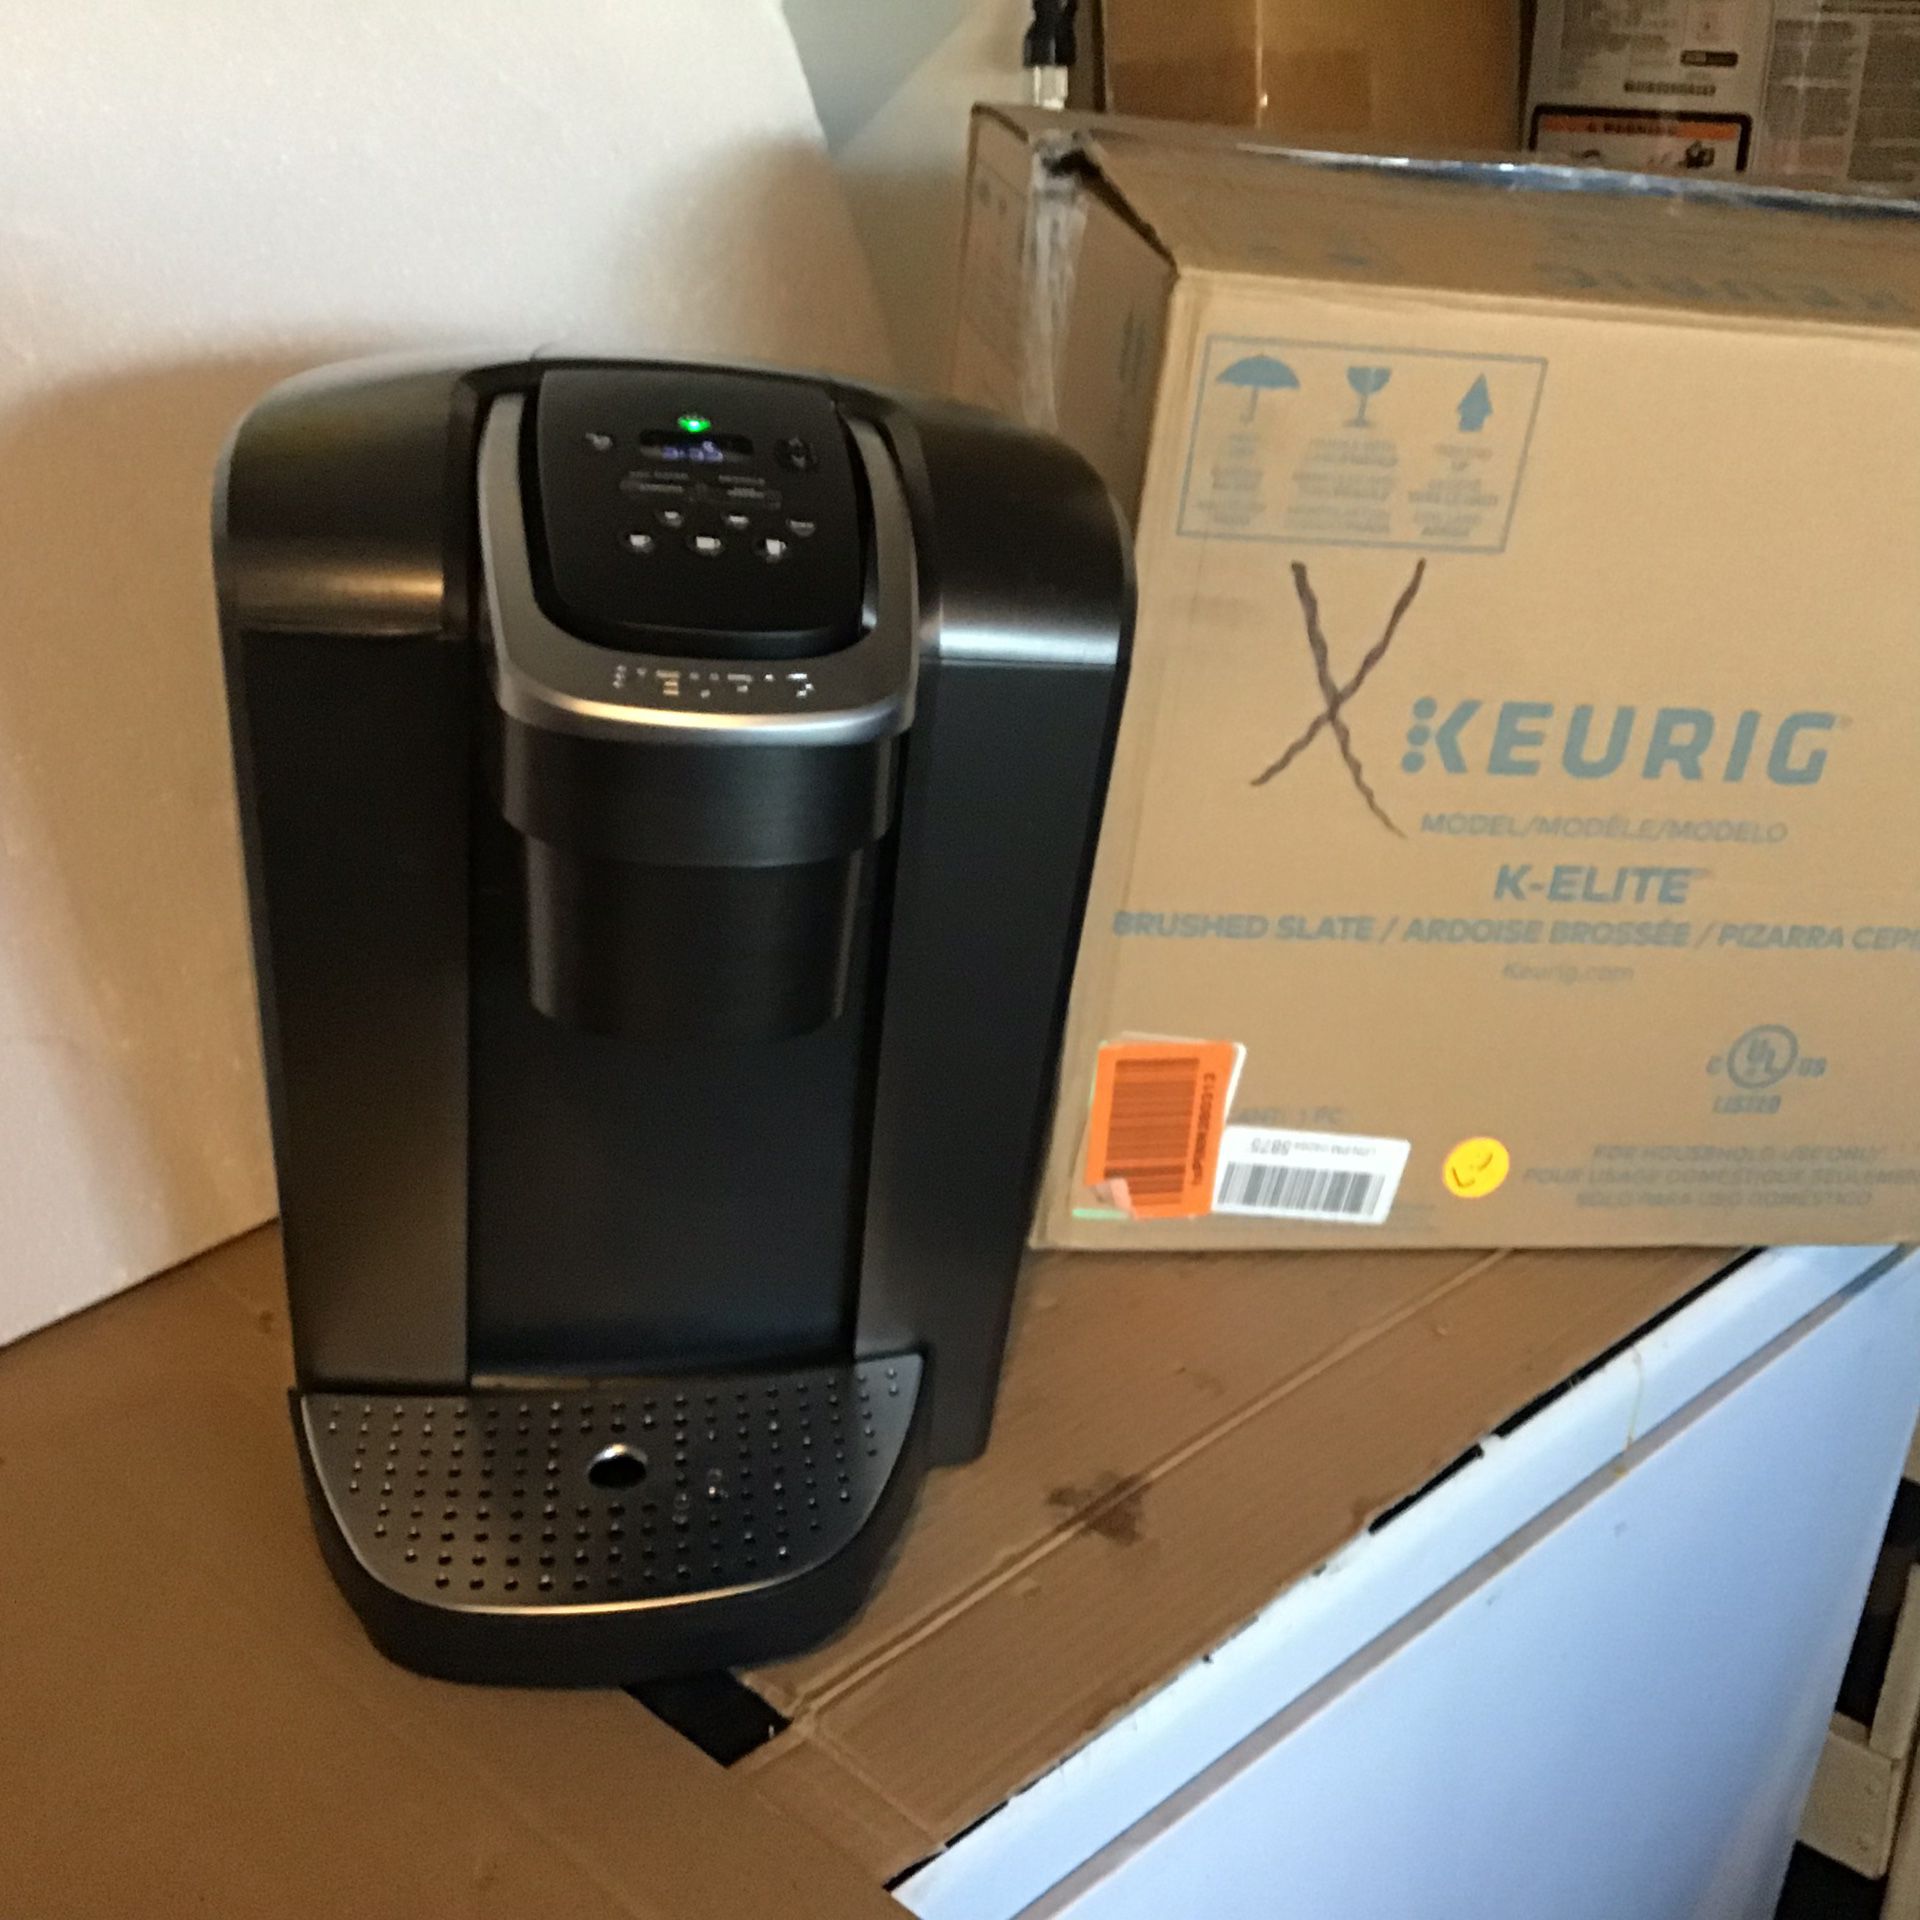 Keurig K Elite k cup single serve coffee maker open box excellent condition in original packaging. Never used